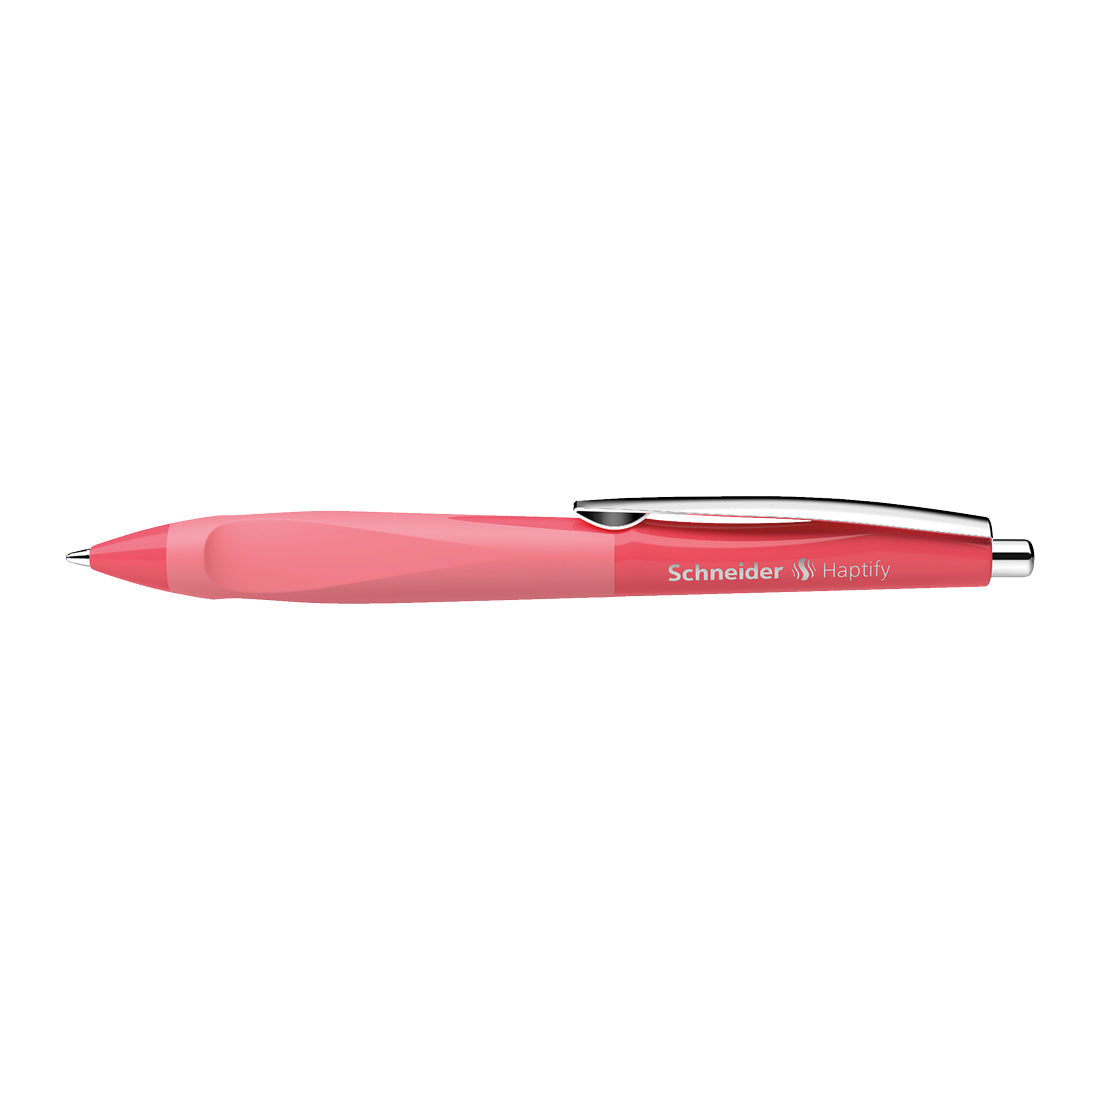 Haptify Ballpoint Pen M, Box of 10#colour_coral